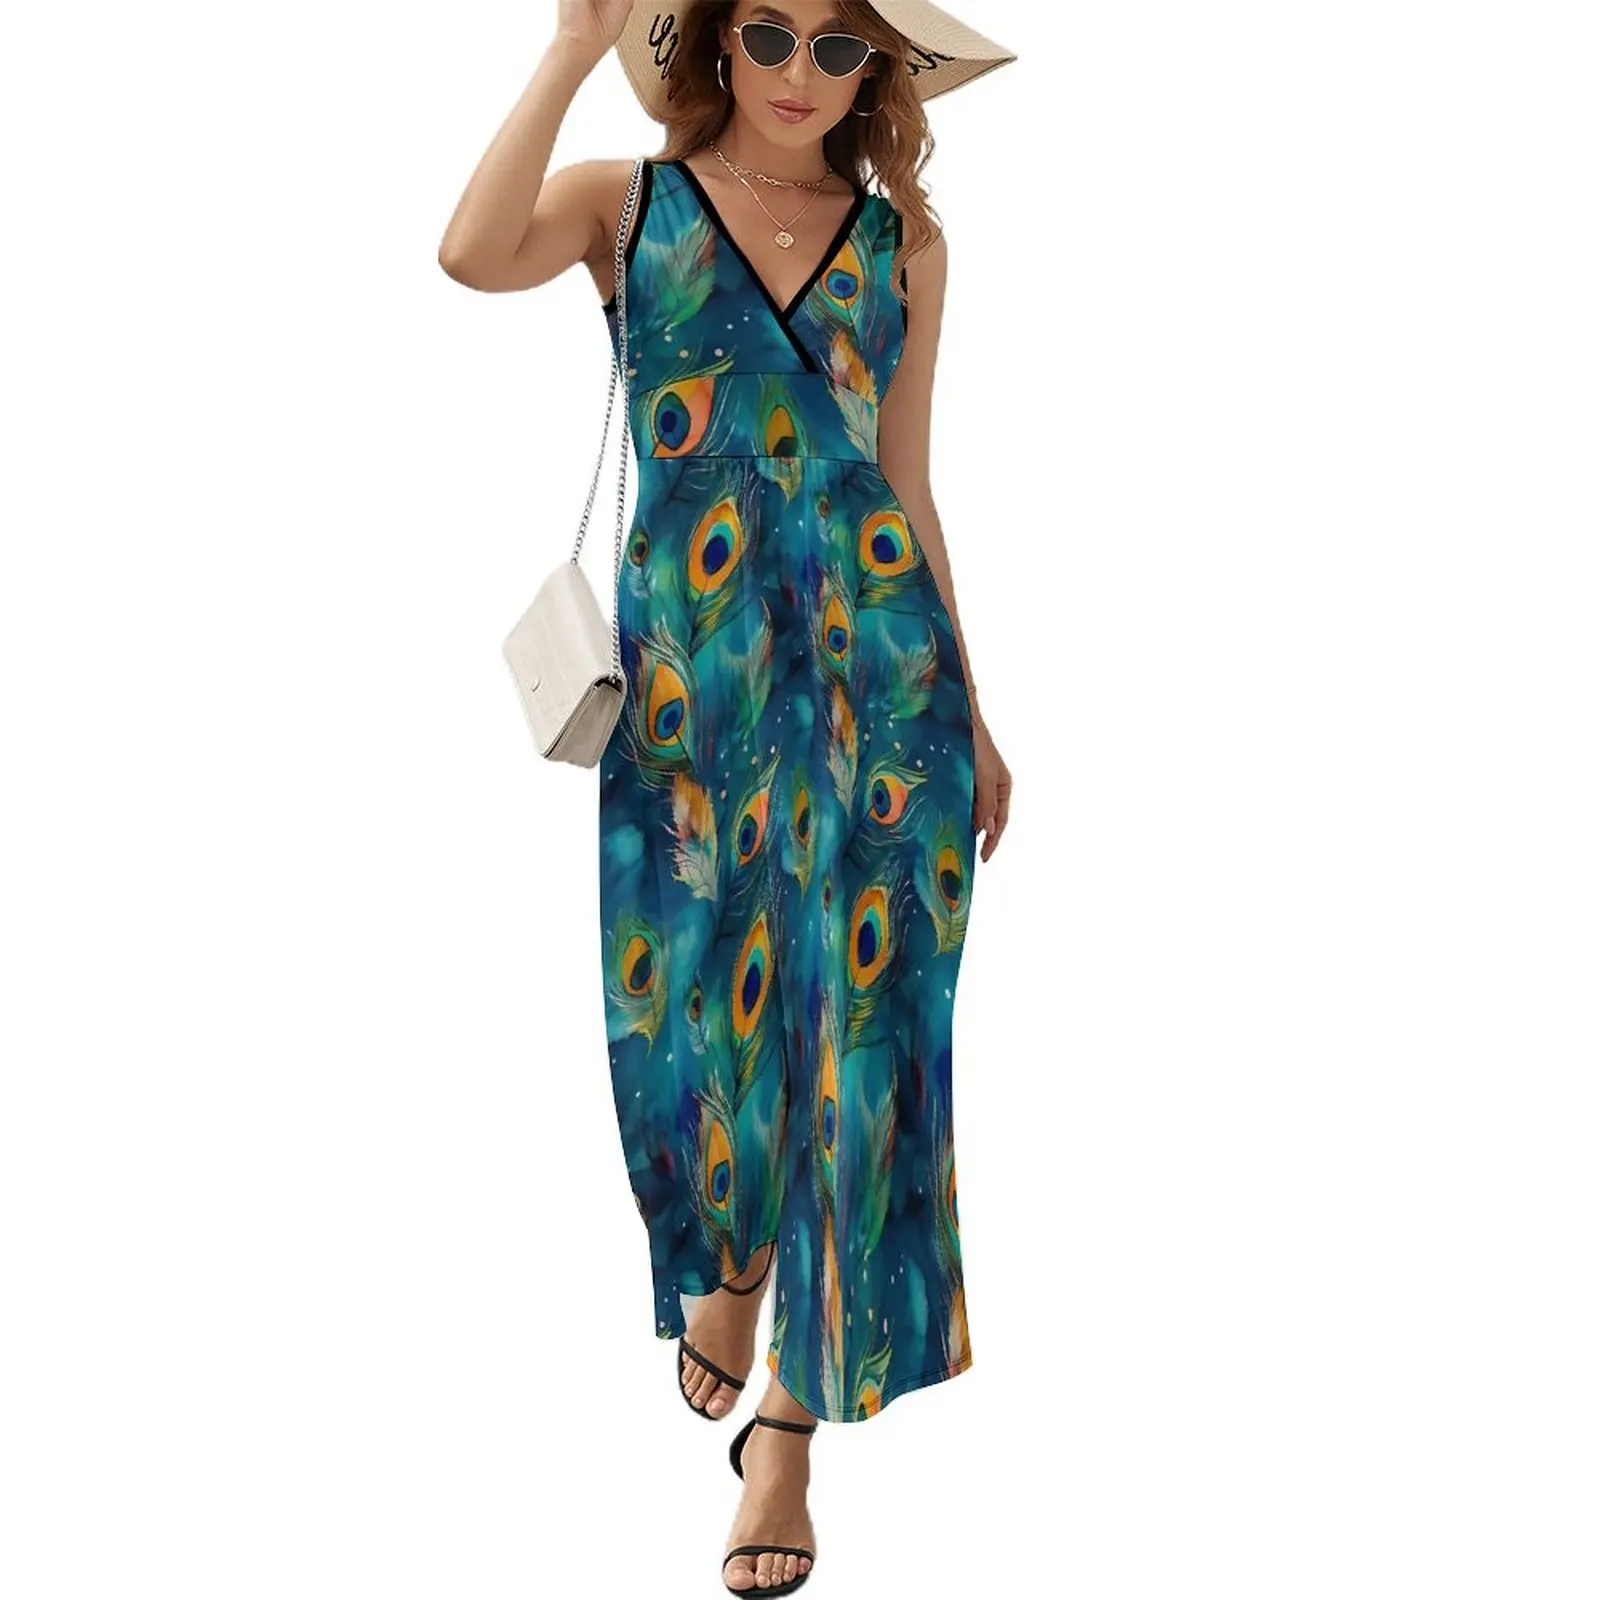 

Watercolor Peacock Feather Dress Summer Abstract Art Street Style Bohemia Long Dresses Female Sleeveless Graphic Cute Maxi Dress